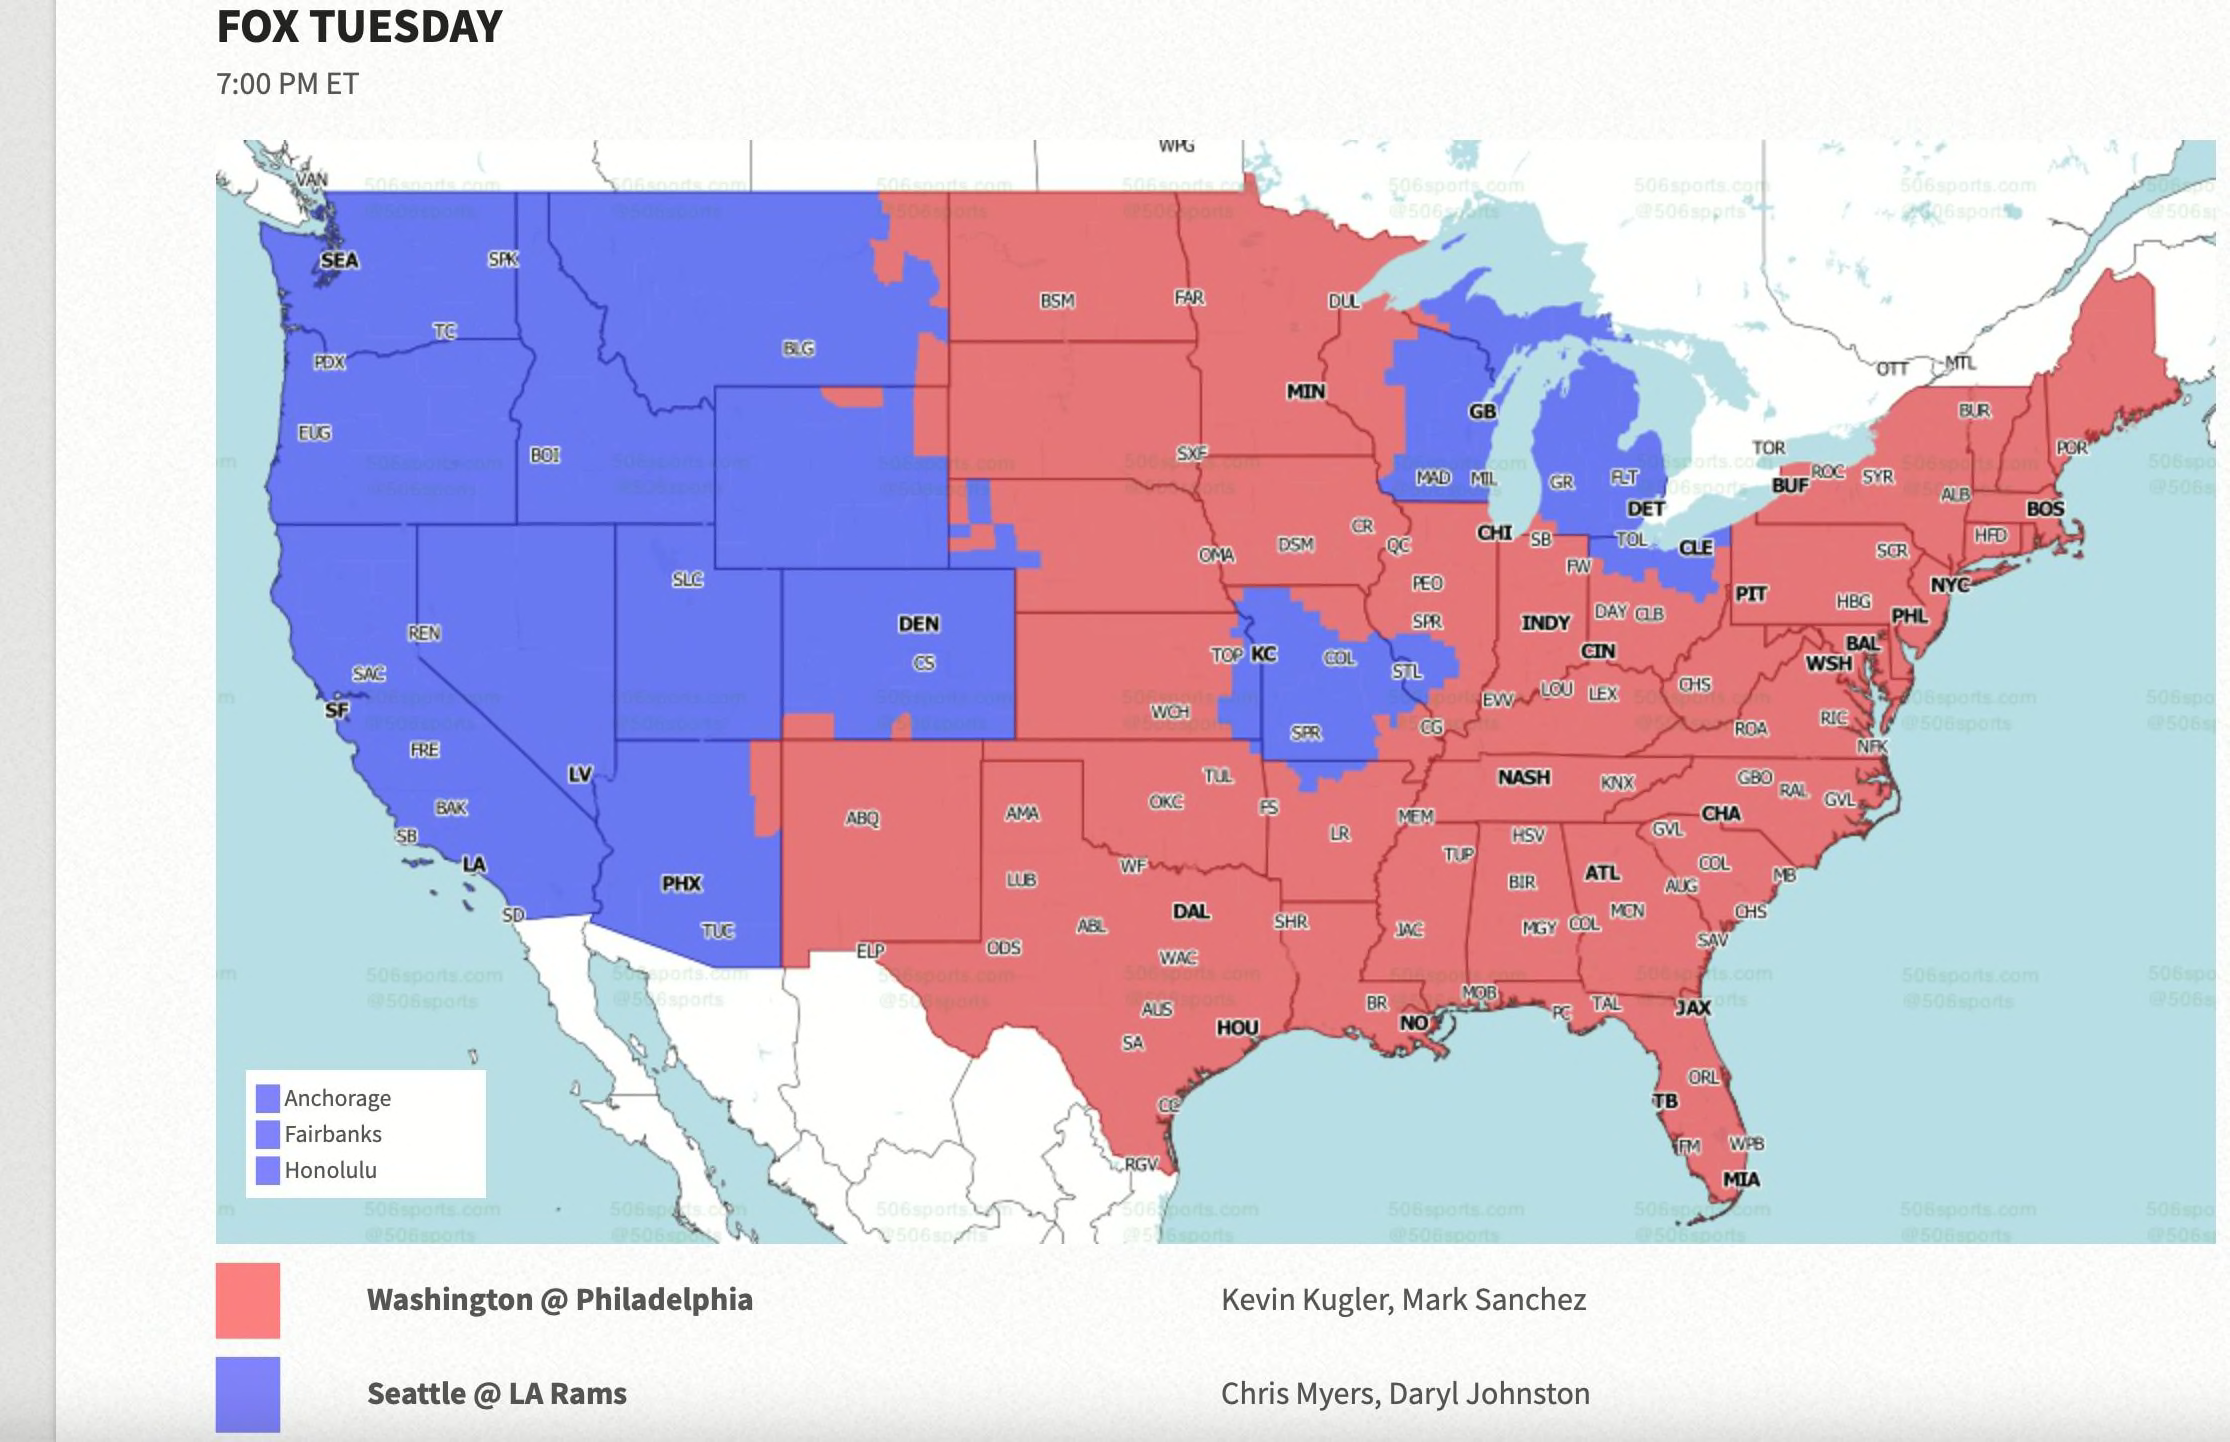 Week 15 NFL TV coverage map Which Tuesday game will be on in your